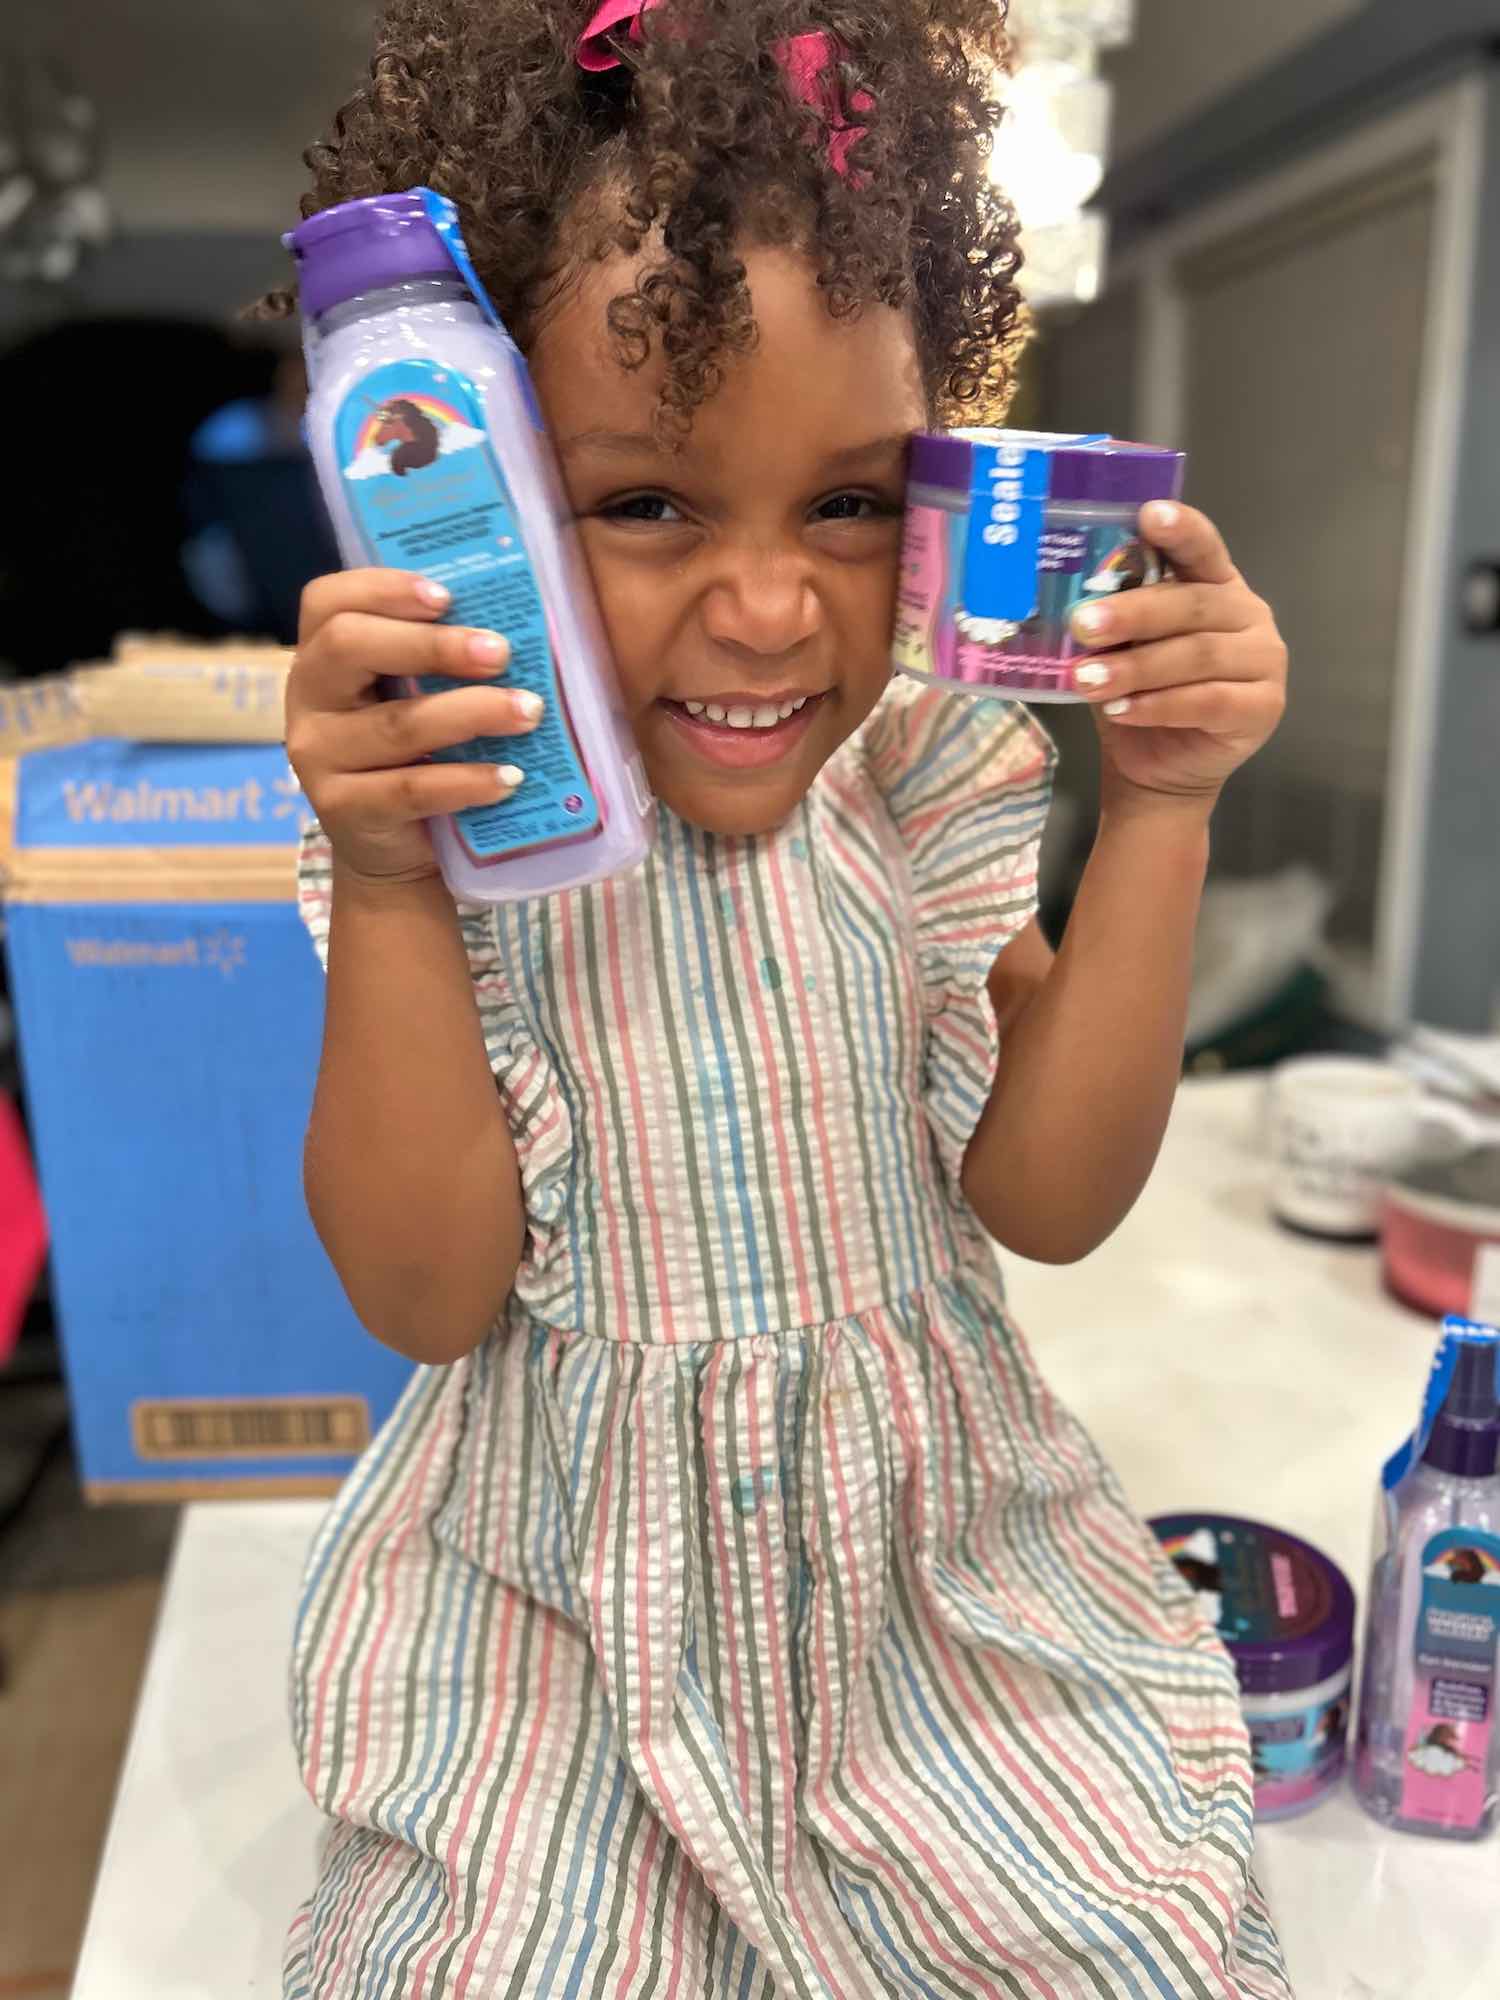 A child smiling while holding Afro Unicorn products.